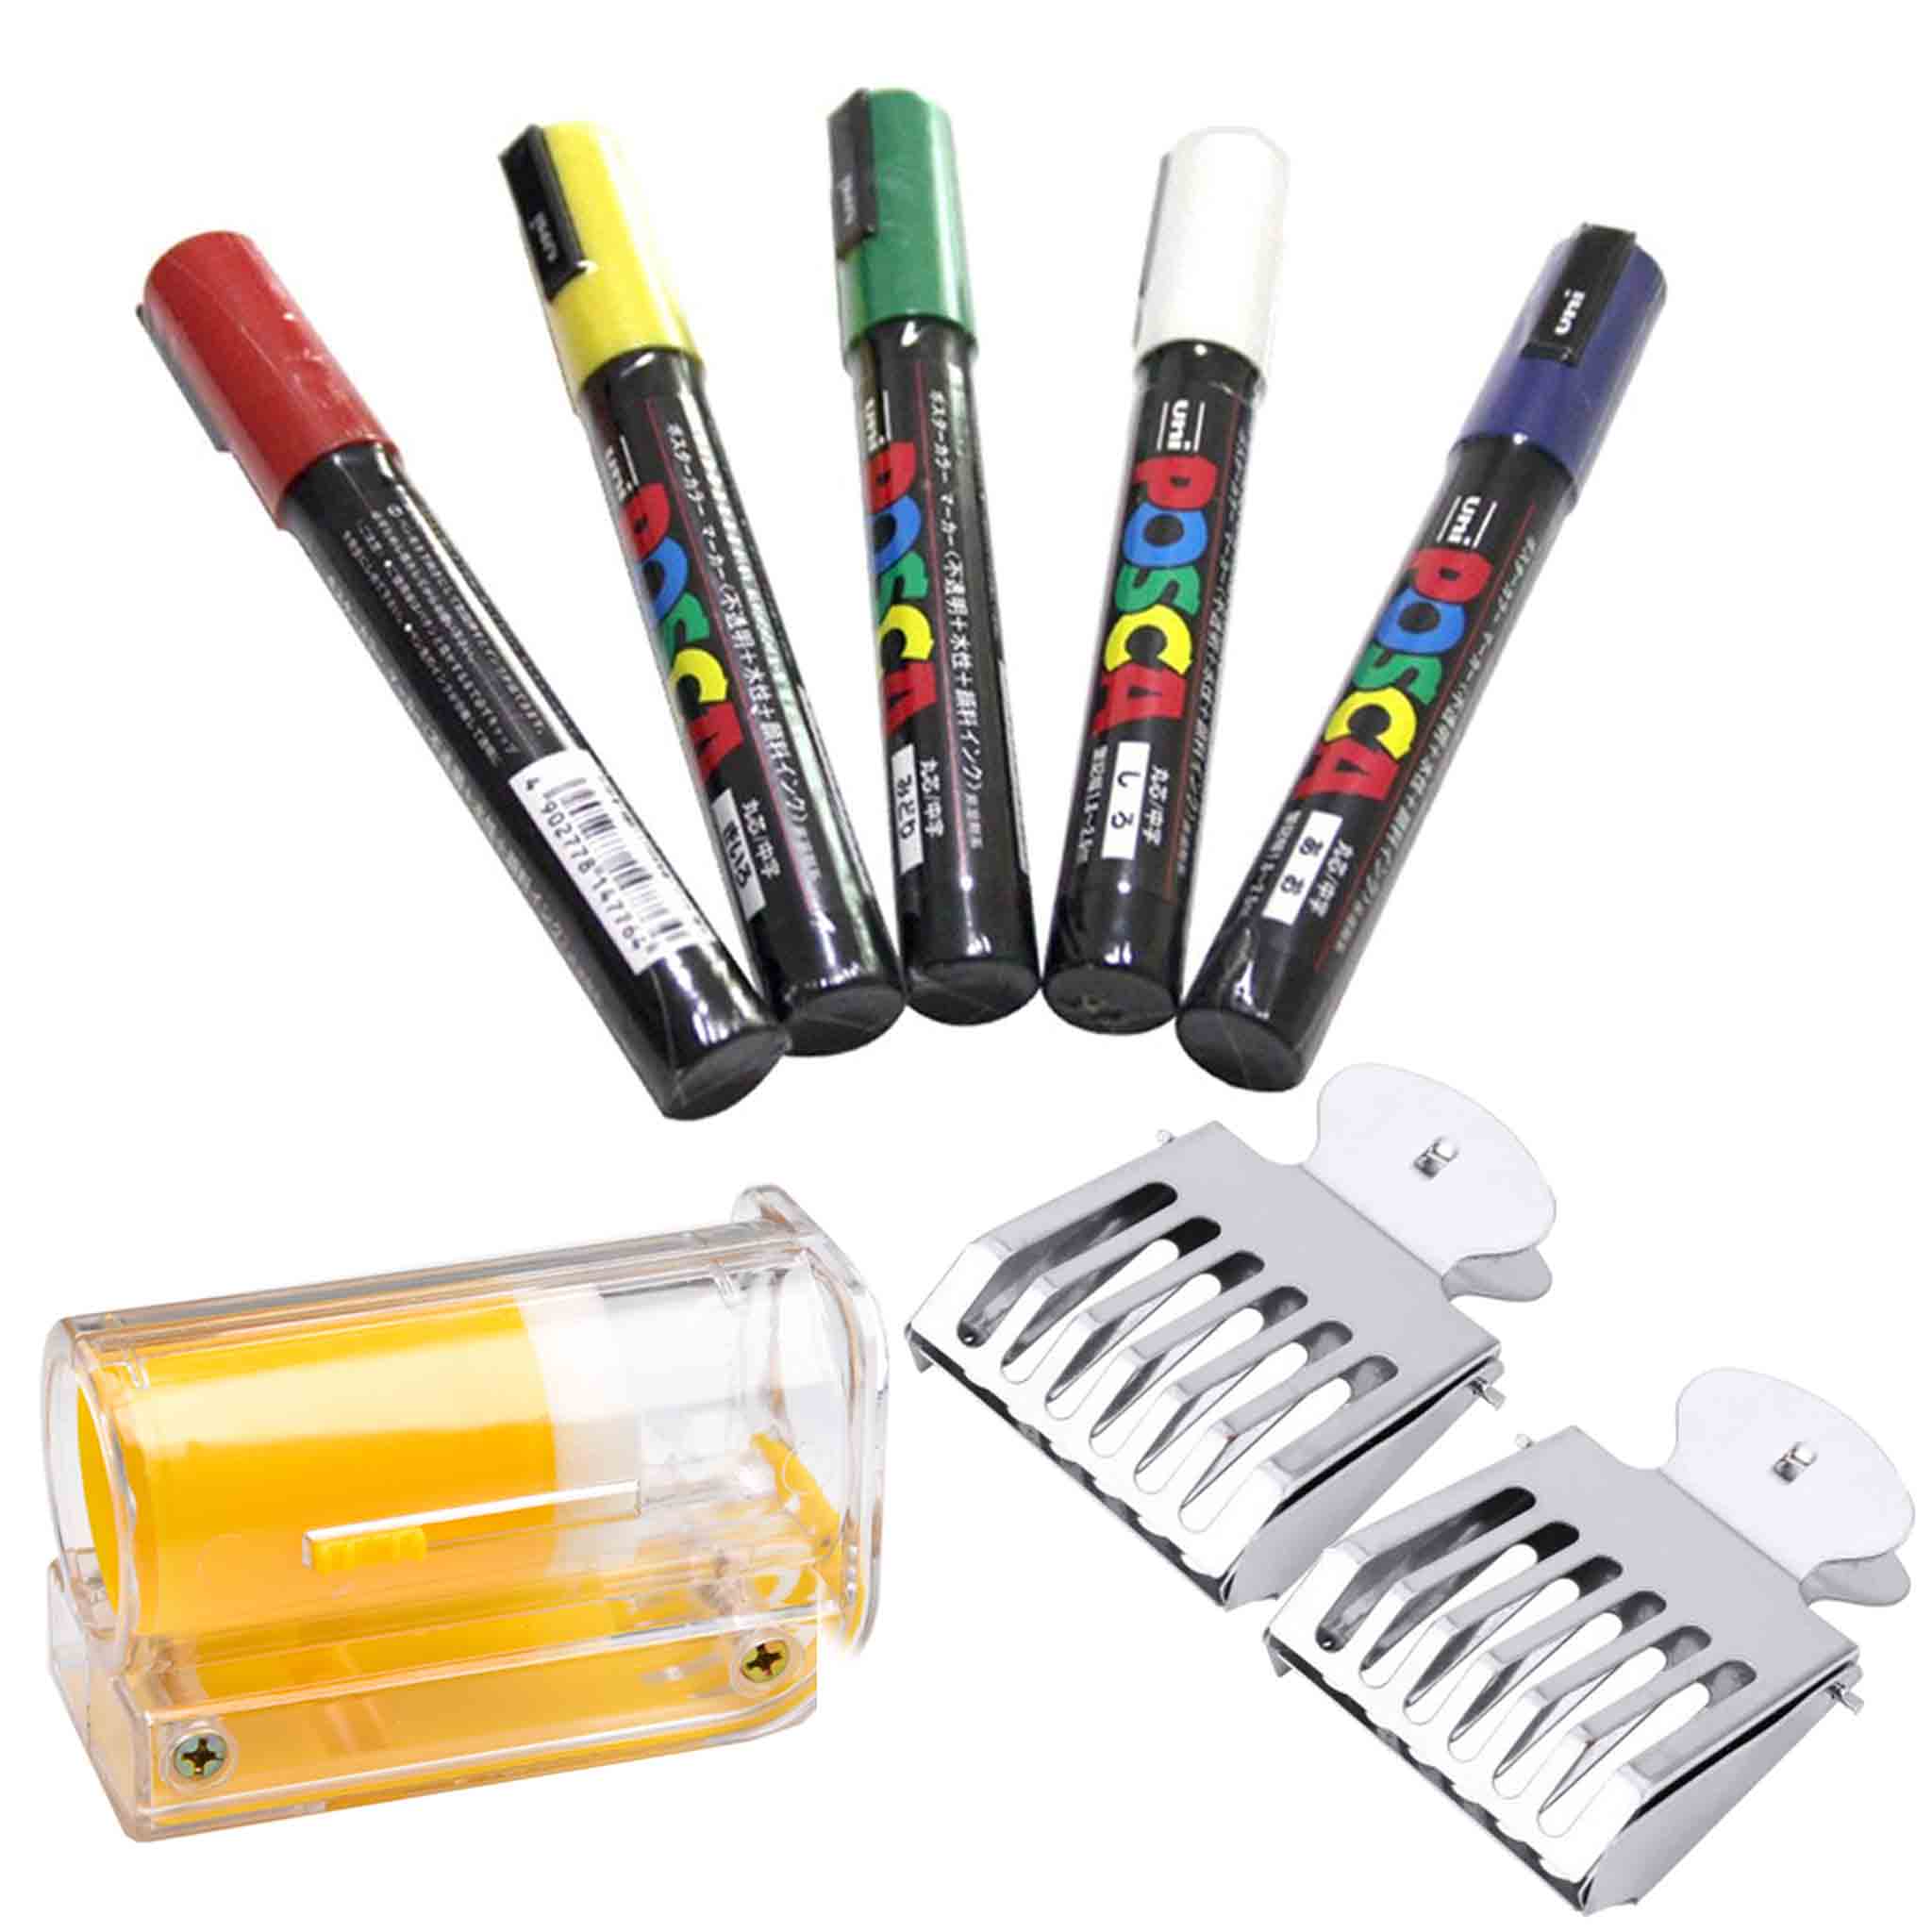 White Posca Water Based, Non Toxic Paint Pen Marker for Marking Queen Bees  Safely with a White Dot